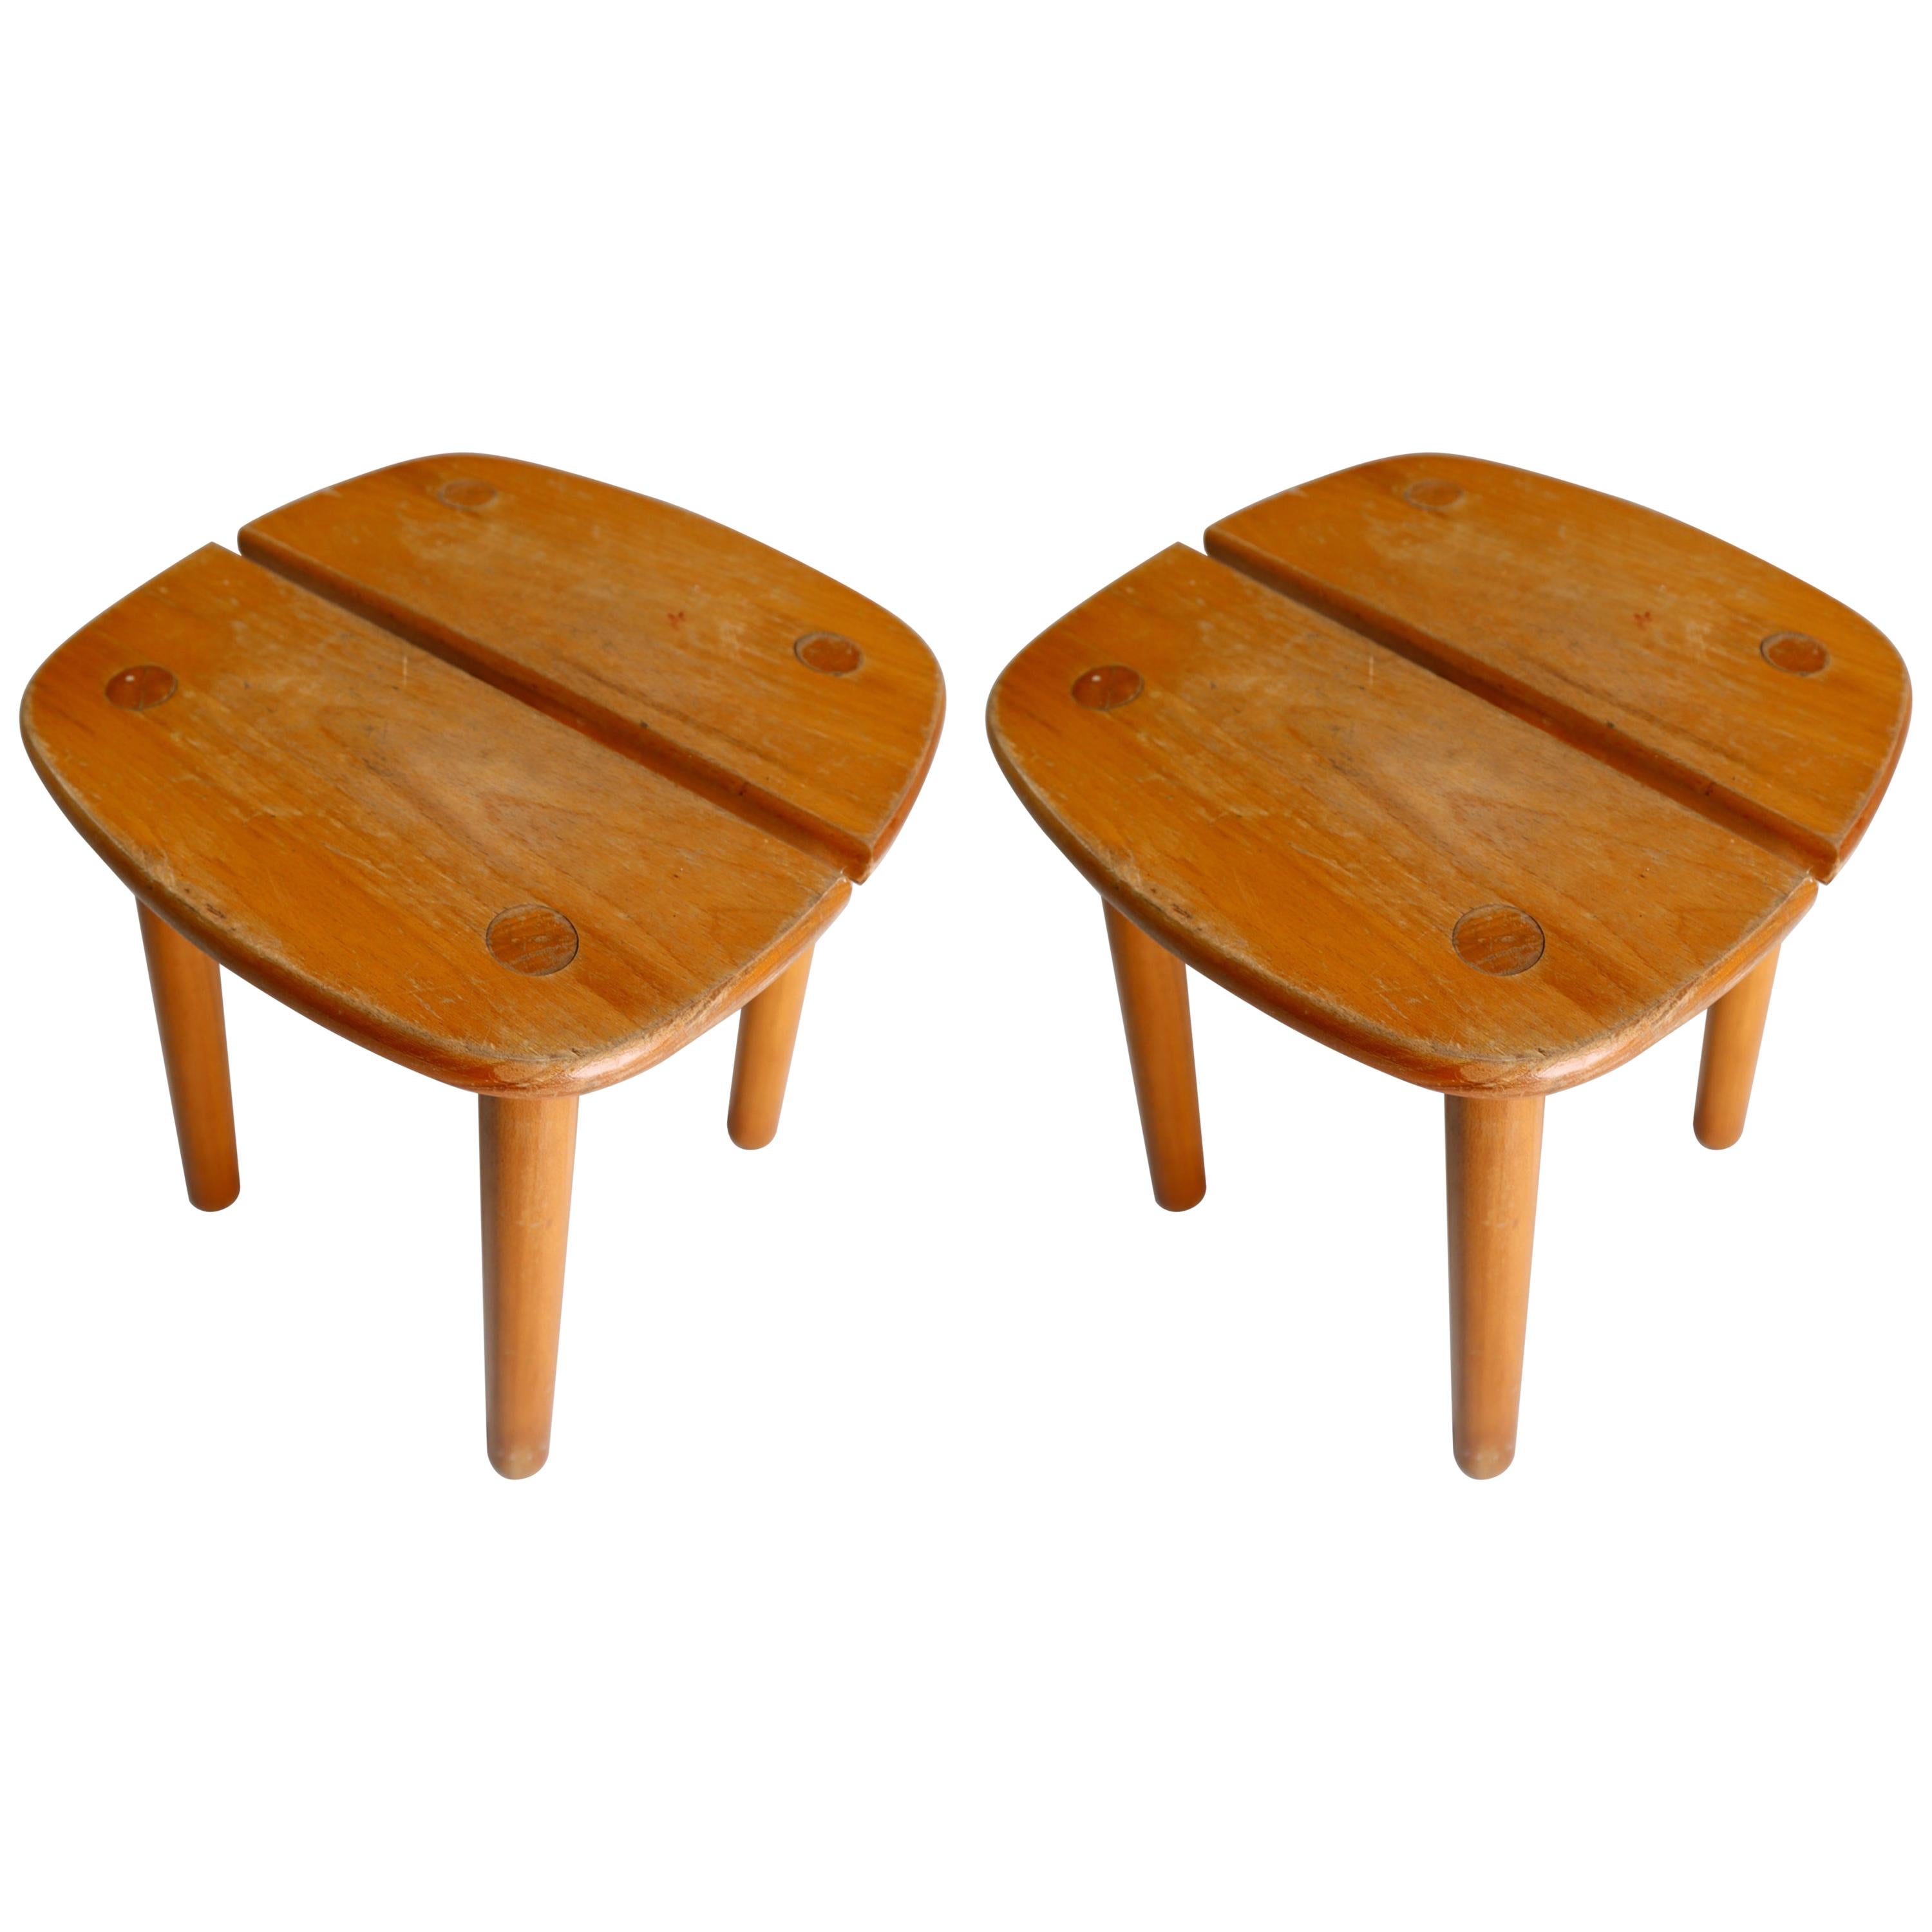 Pair of Two Stools by Pierre Gautier-Delaye Coffee Bean Model, France, 1960s